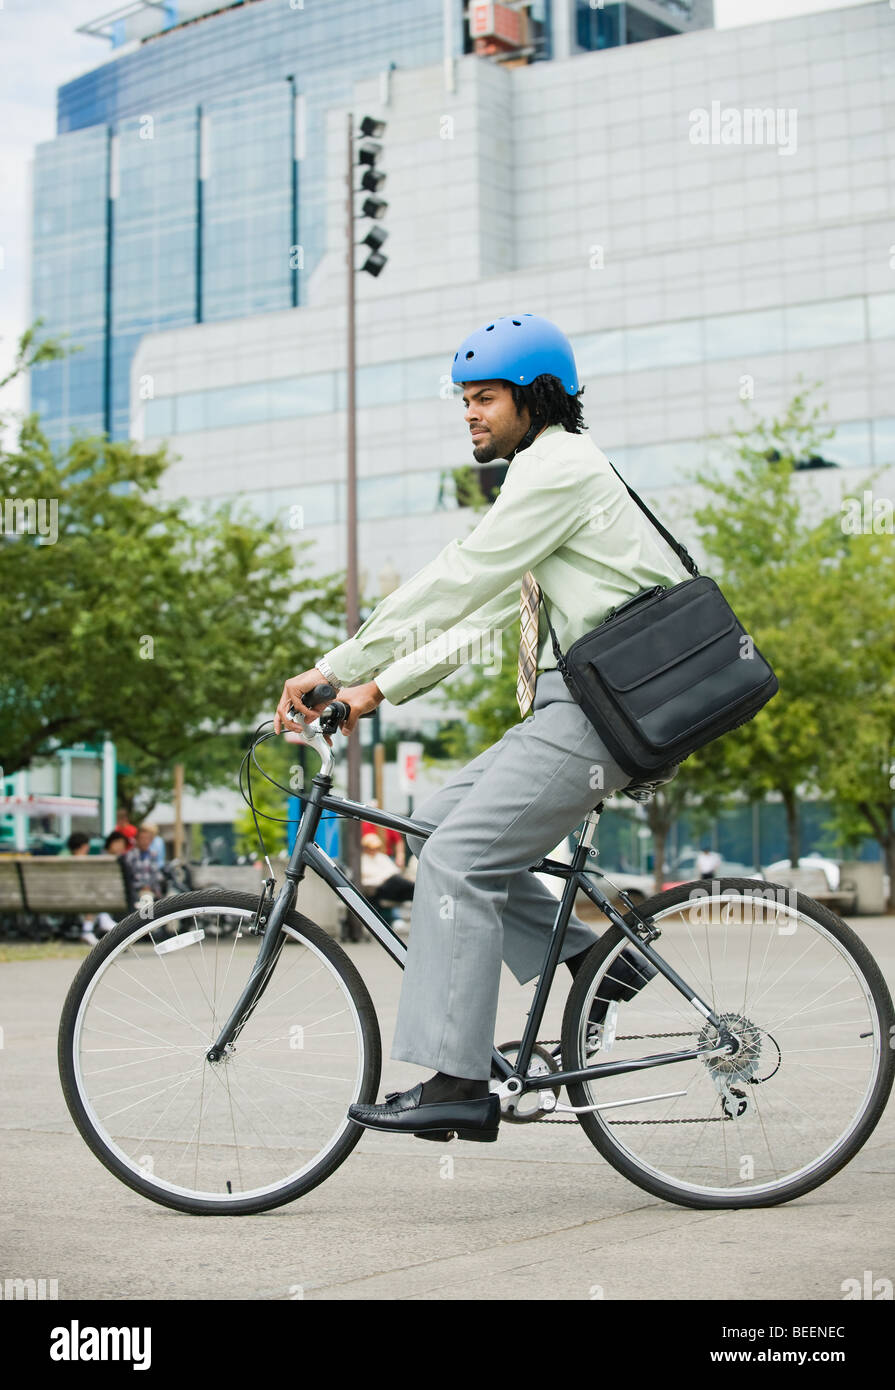 Mixed race man riding bicycle in city Stock Photo